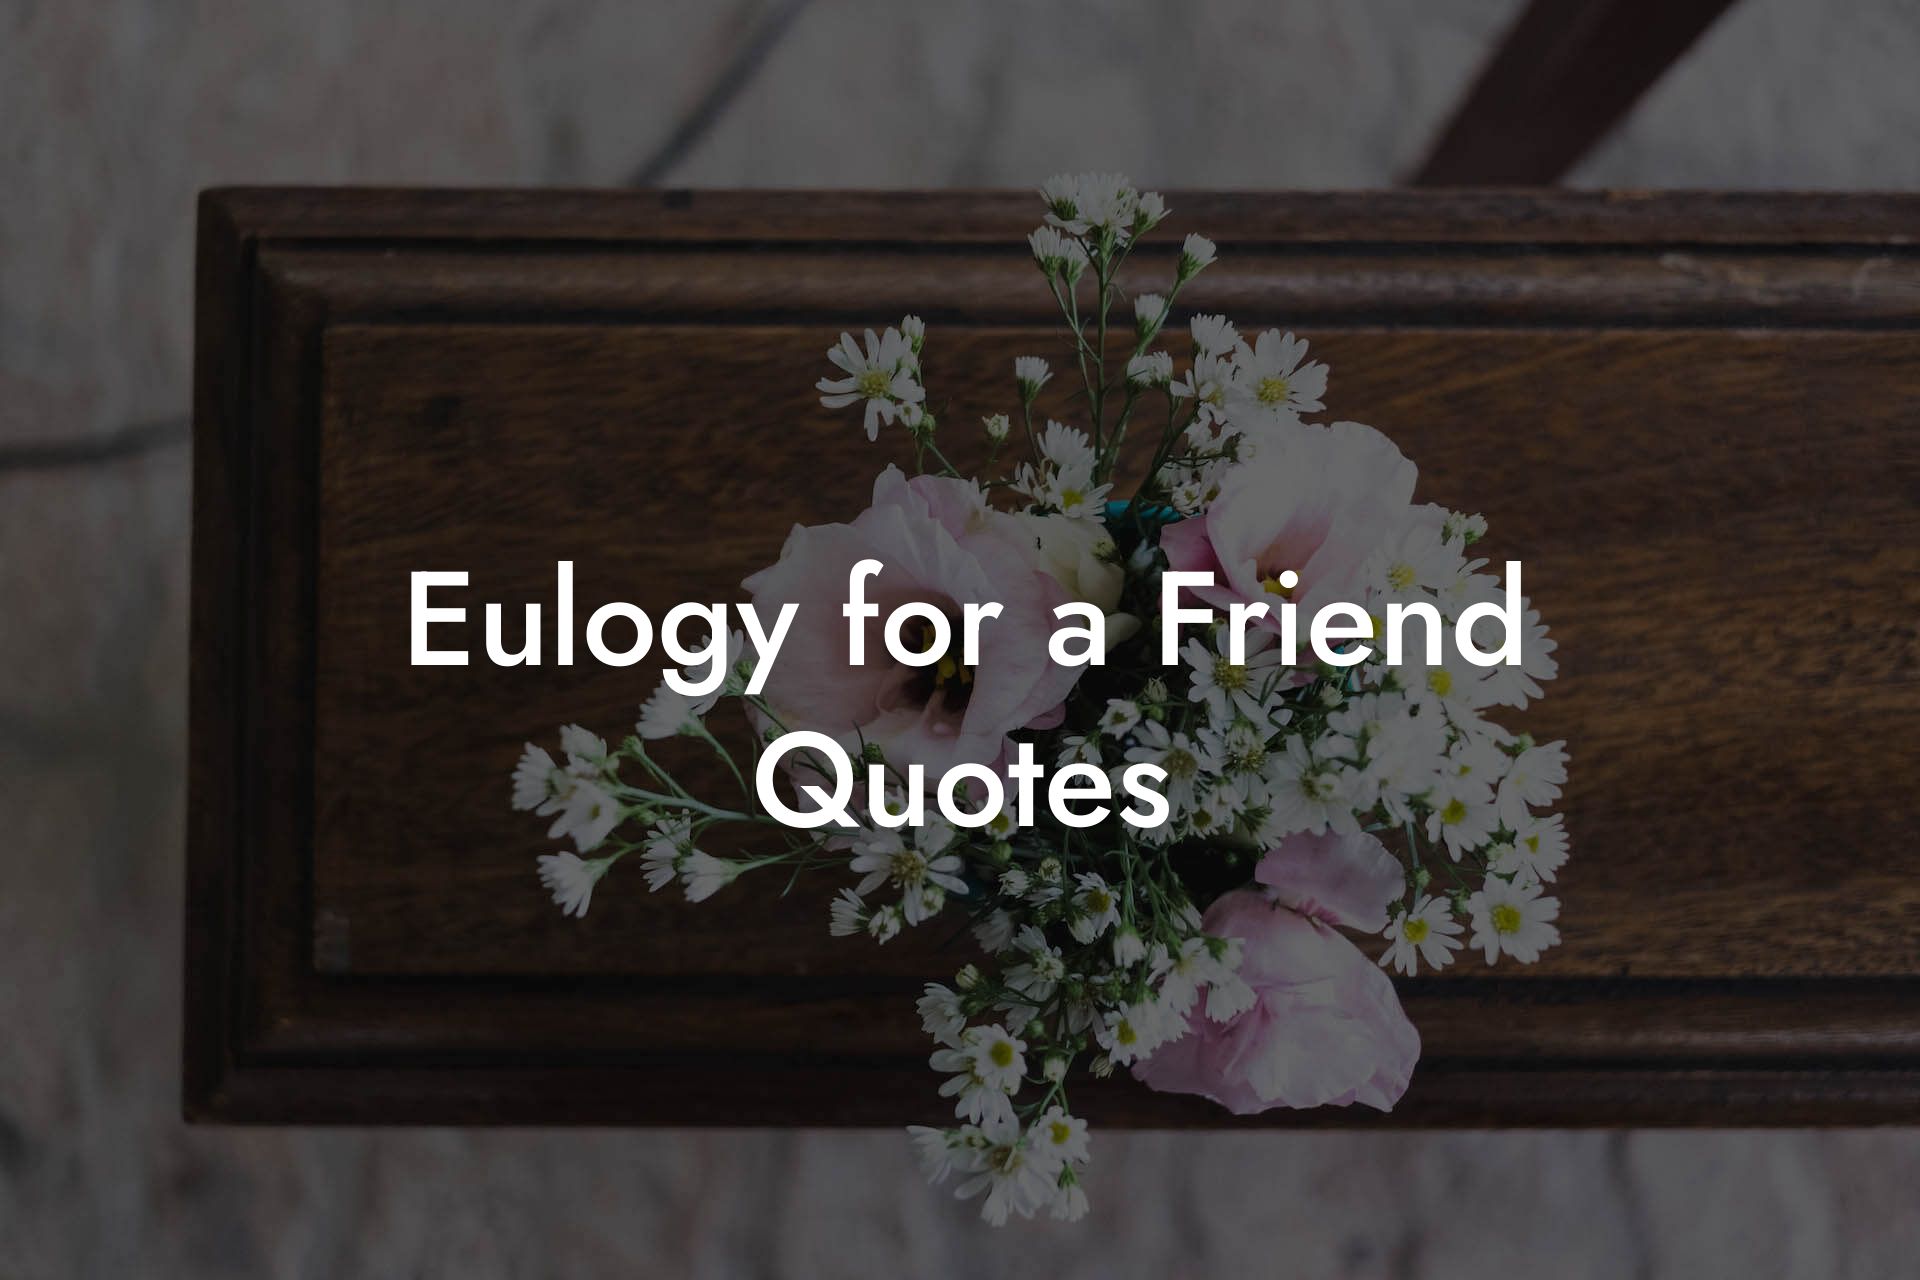 Eulogy for a Friend Quotes